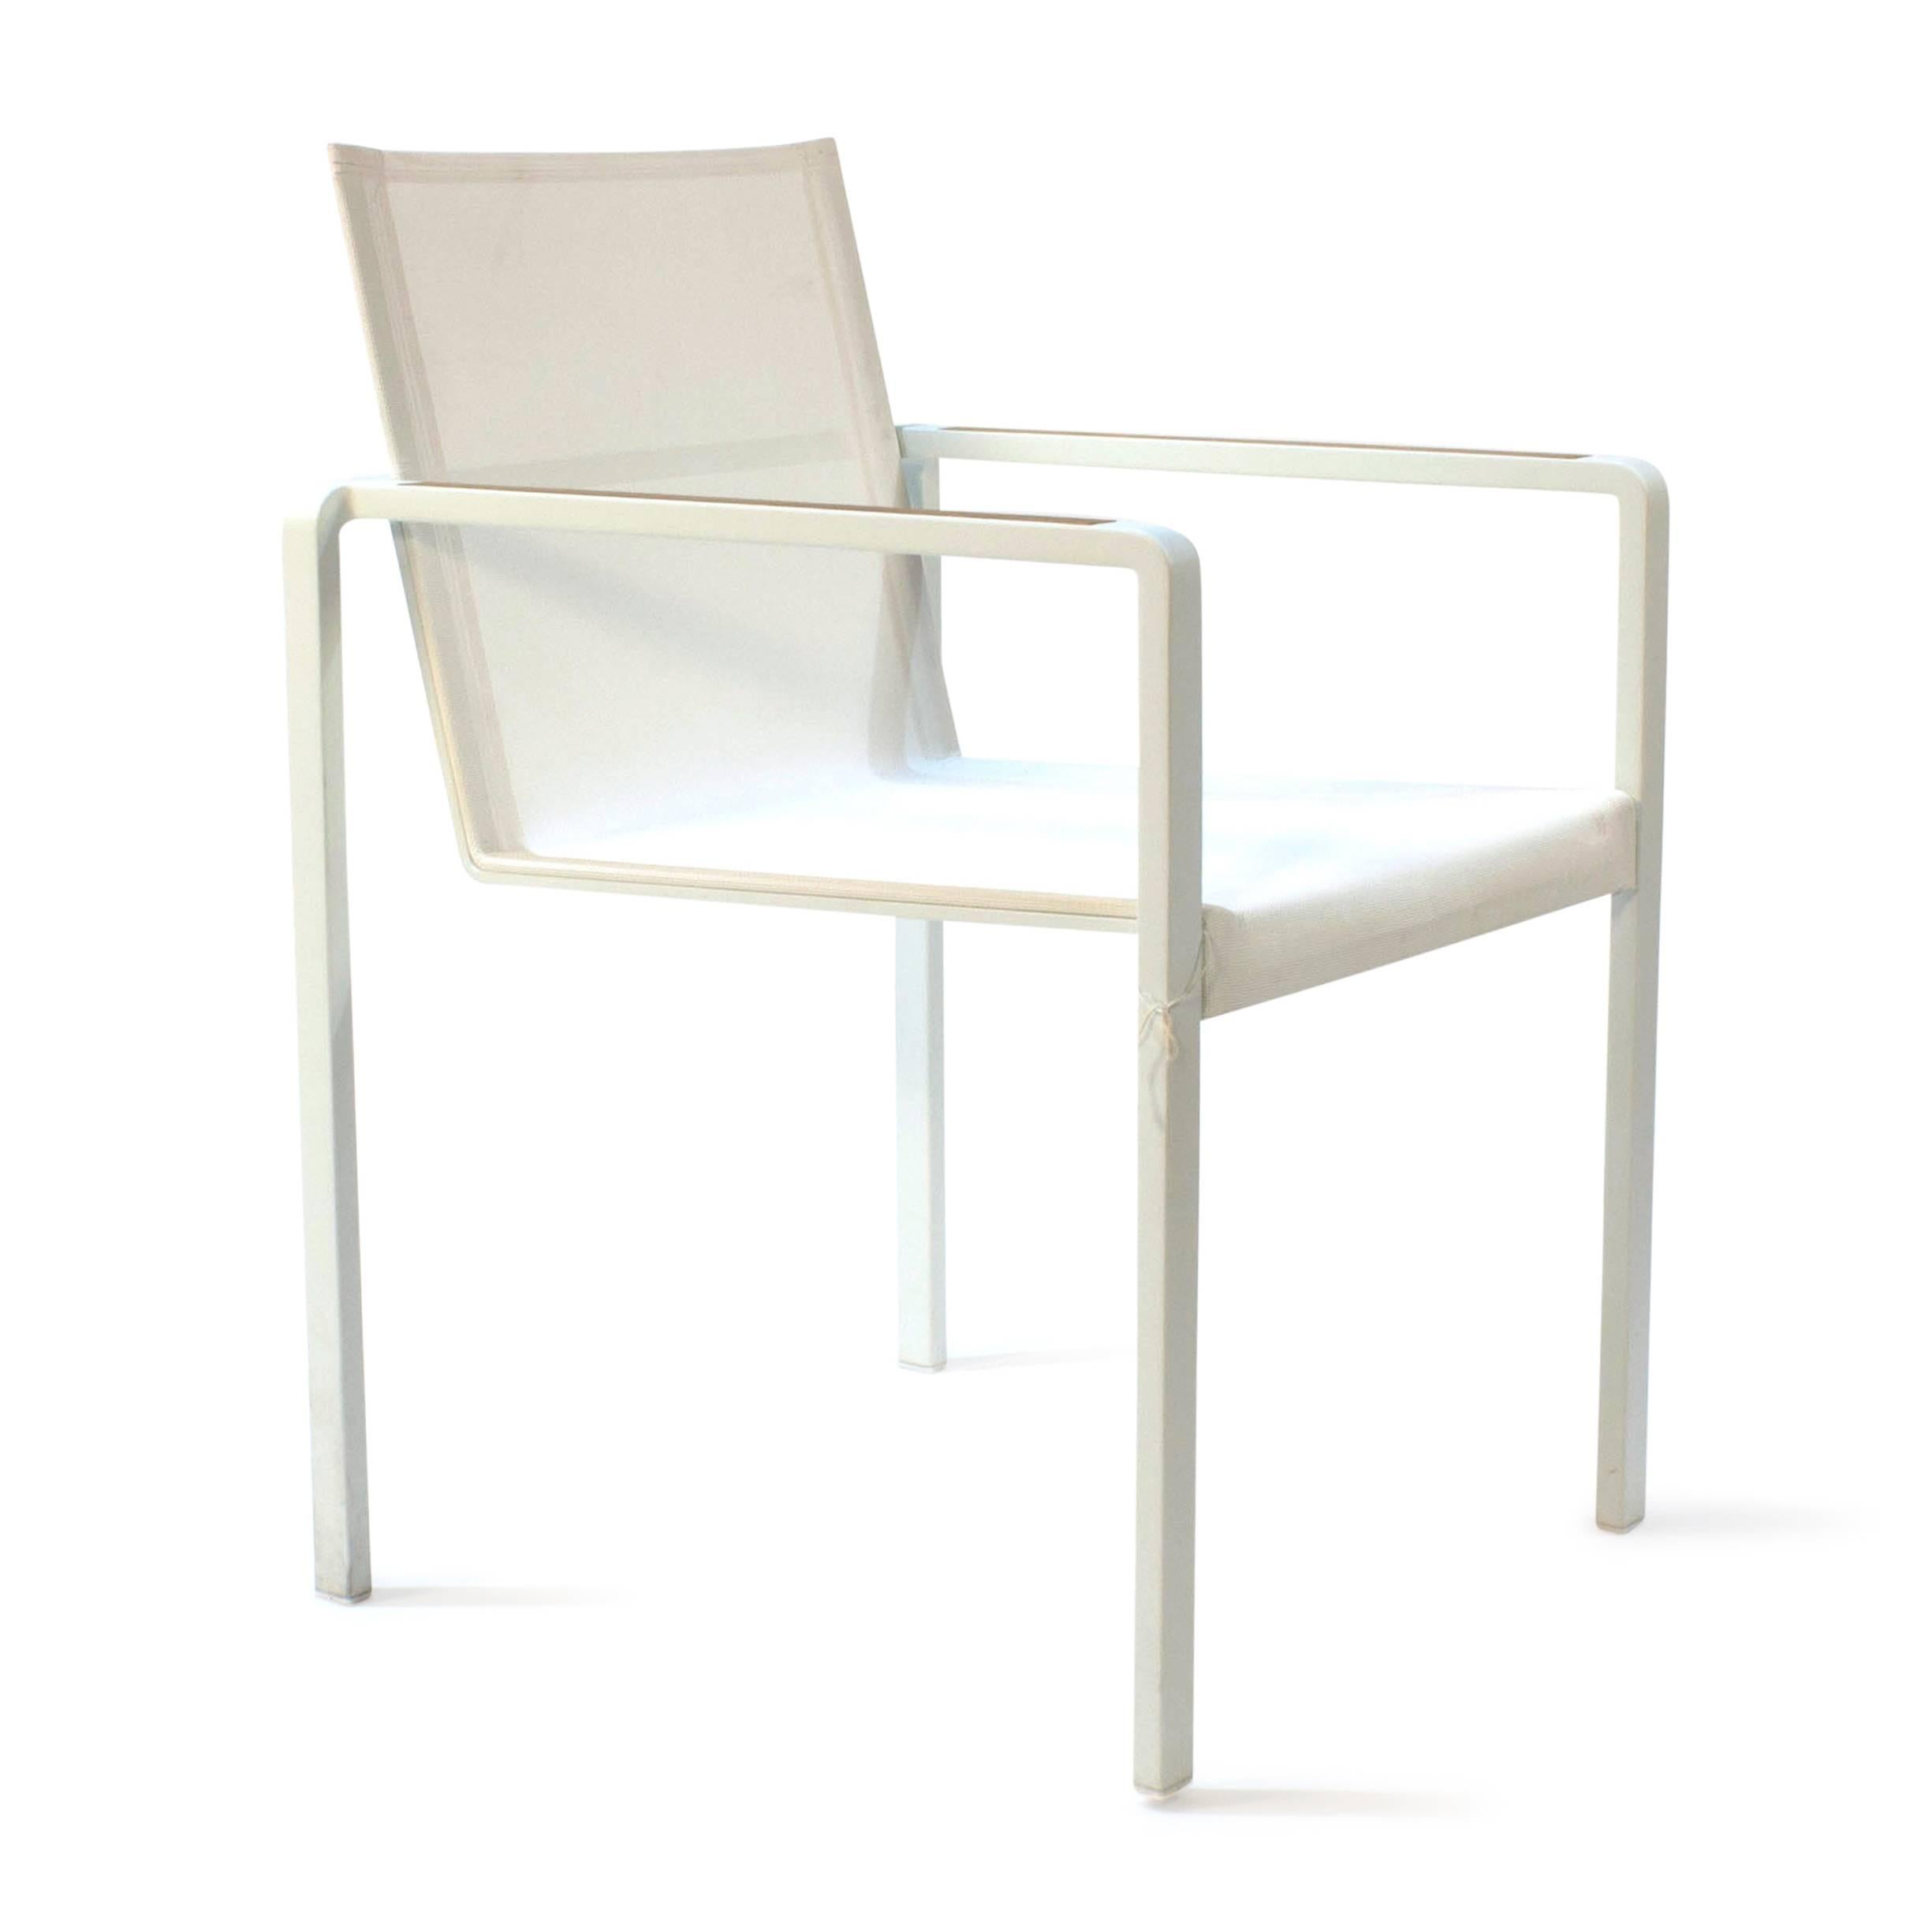 Belgian White and Teak Alura 55 Stackable Outdoor Dining Armchair by Royal Botania For Sale